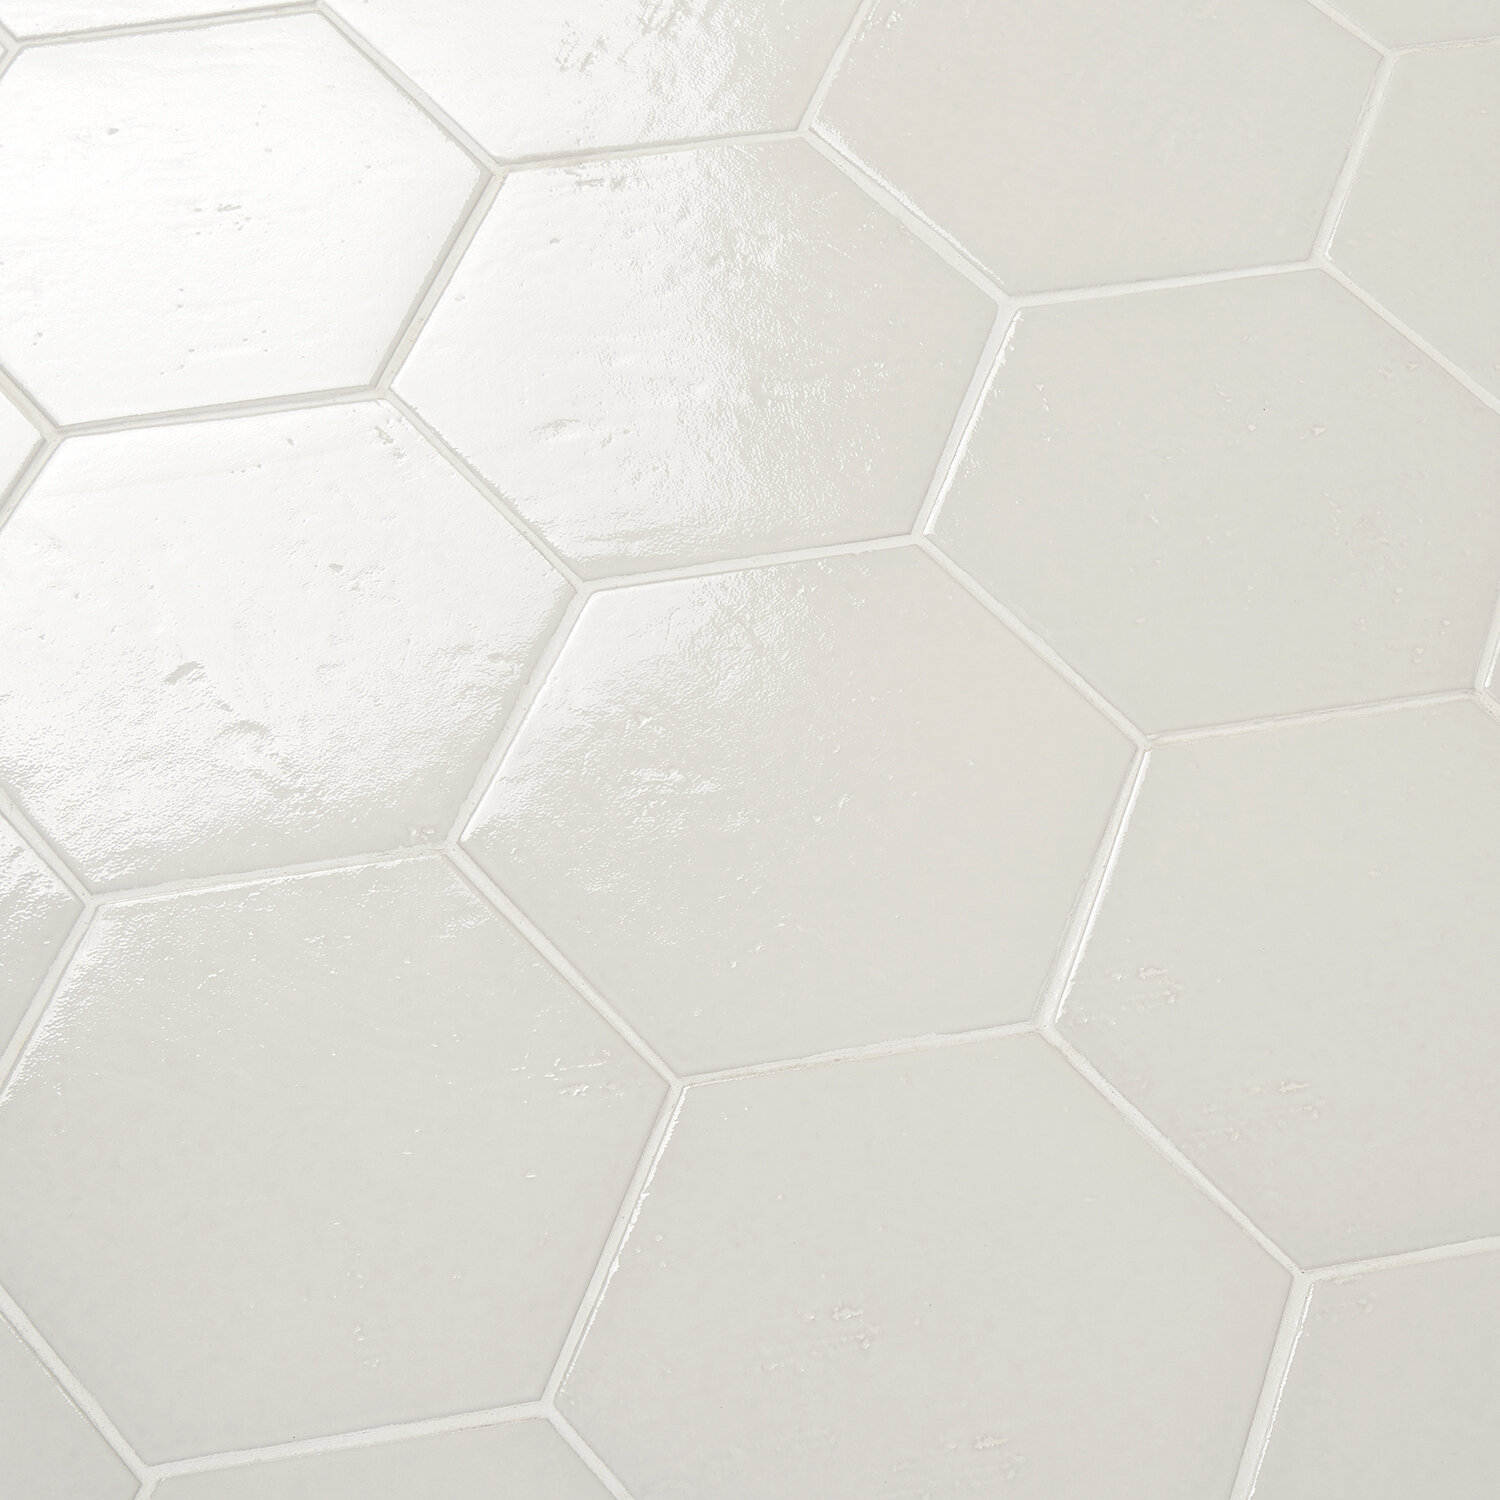 Appaloosa Black Hexagon 7 in 36 Pieces, 10.76 Sq. Ft. / Box Porcelain Floor and Wall Tile